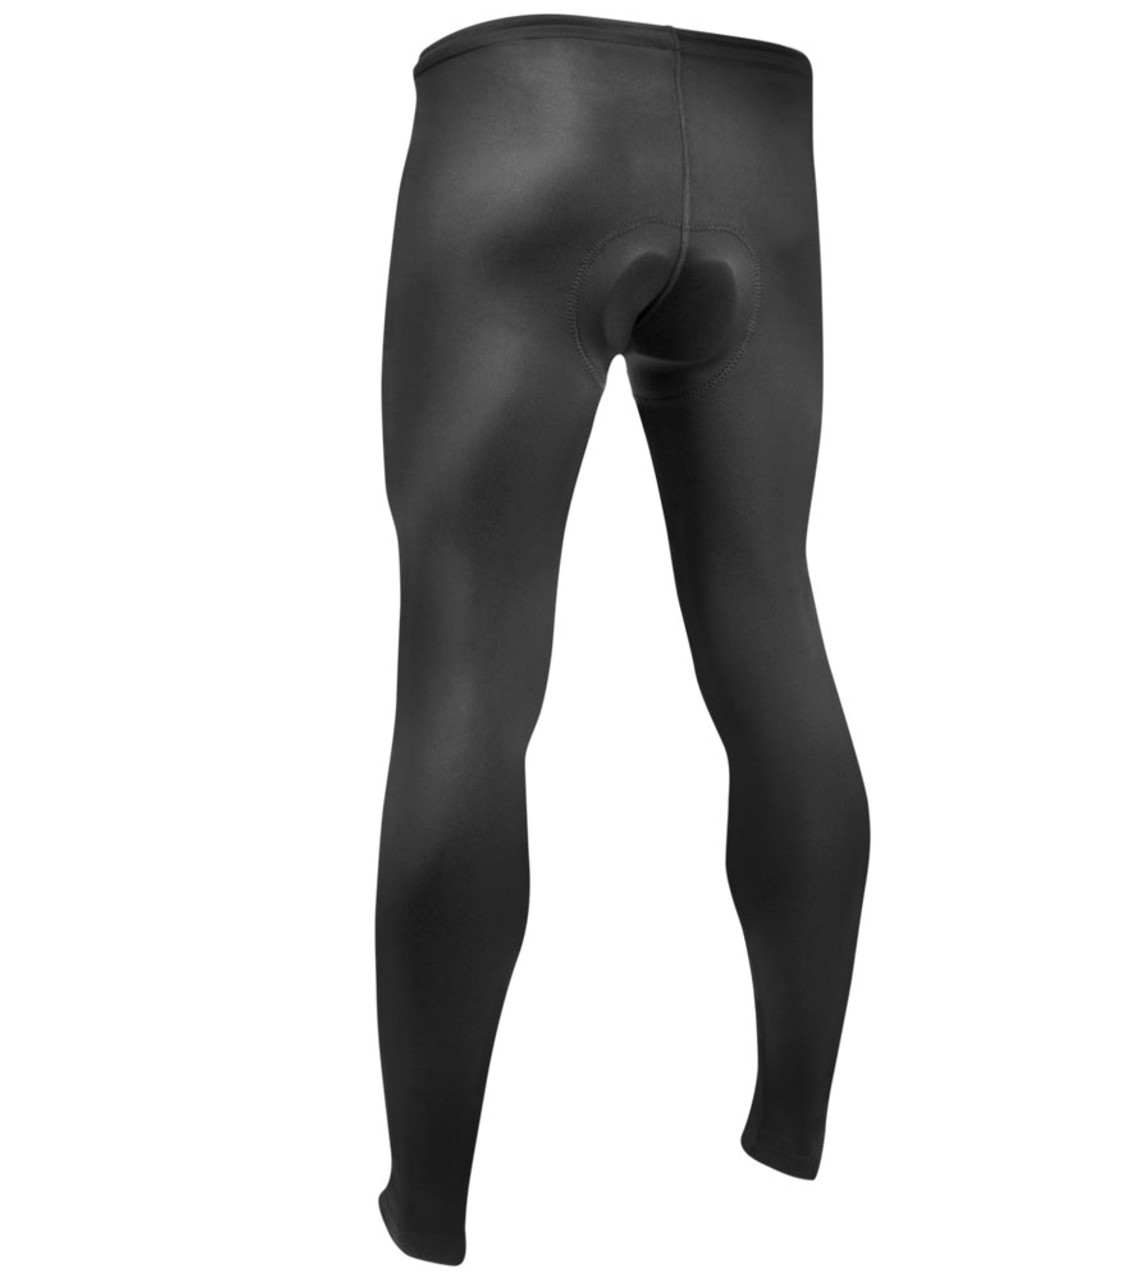 Men's USA Classic Quality Black Compression Padded Cycling Tights